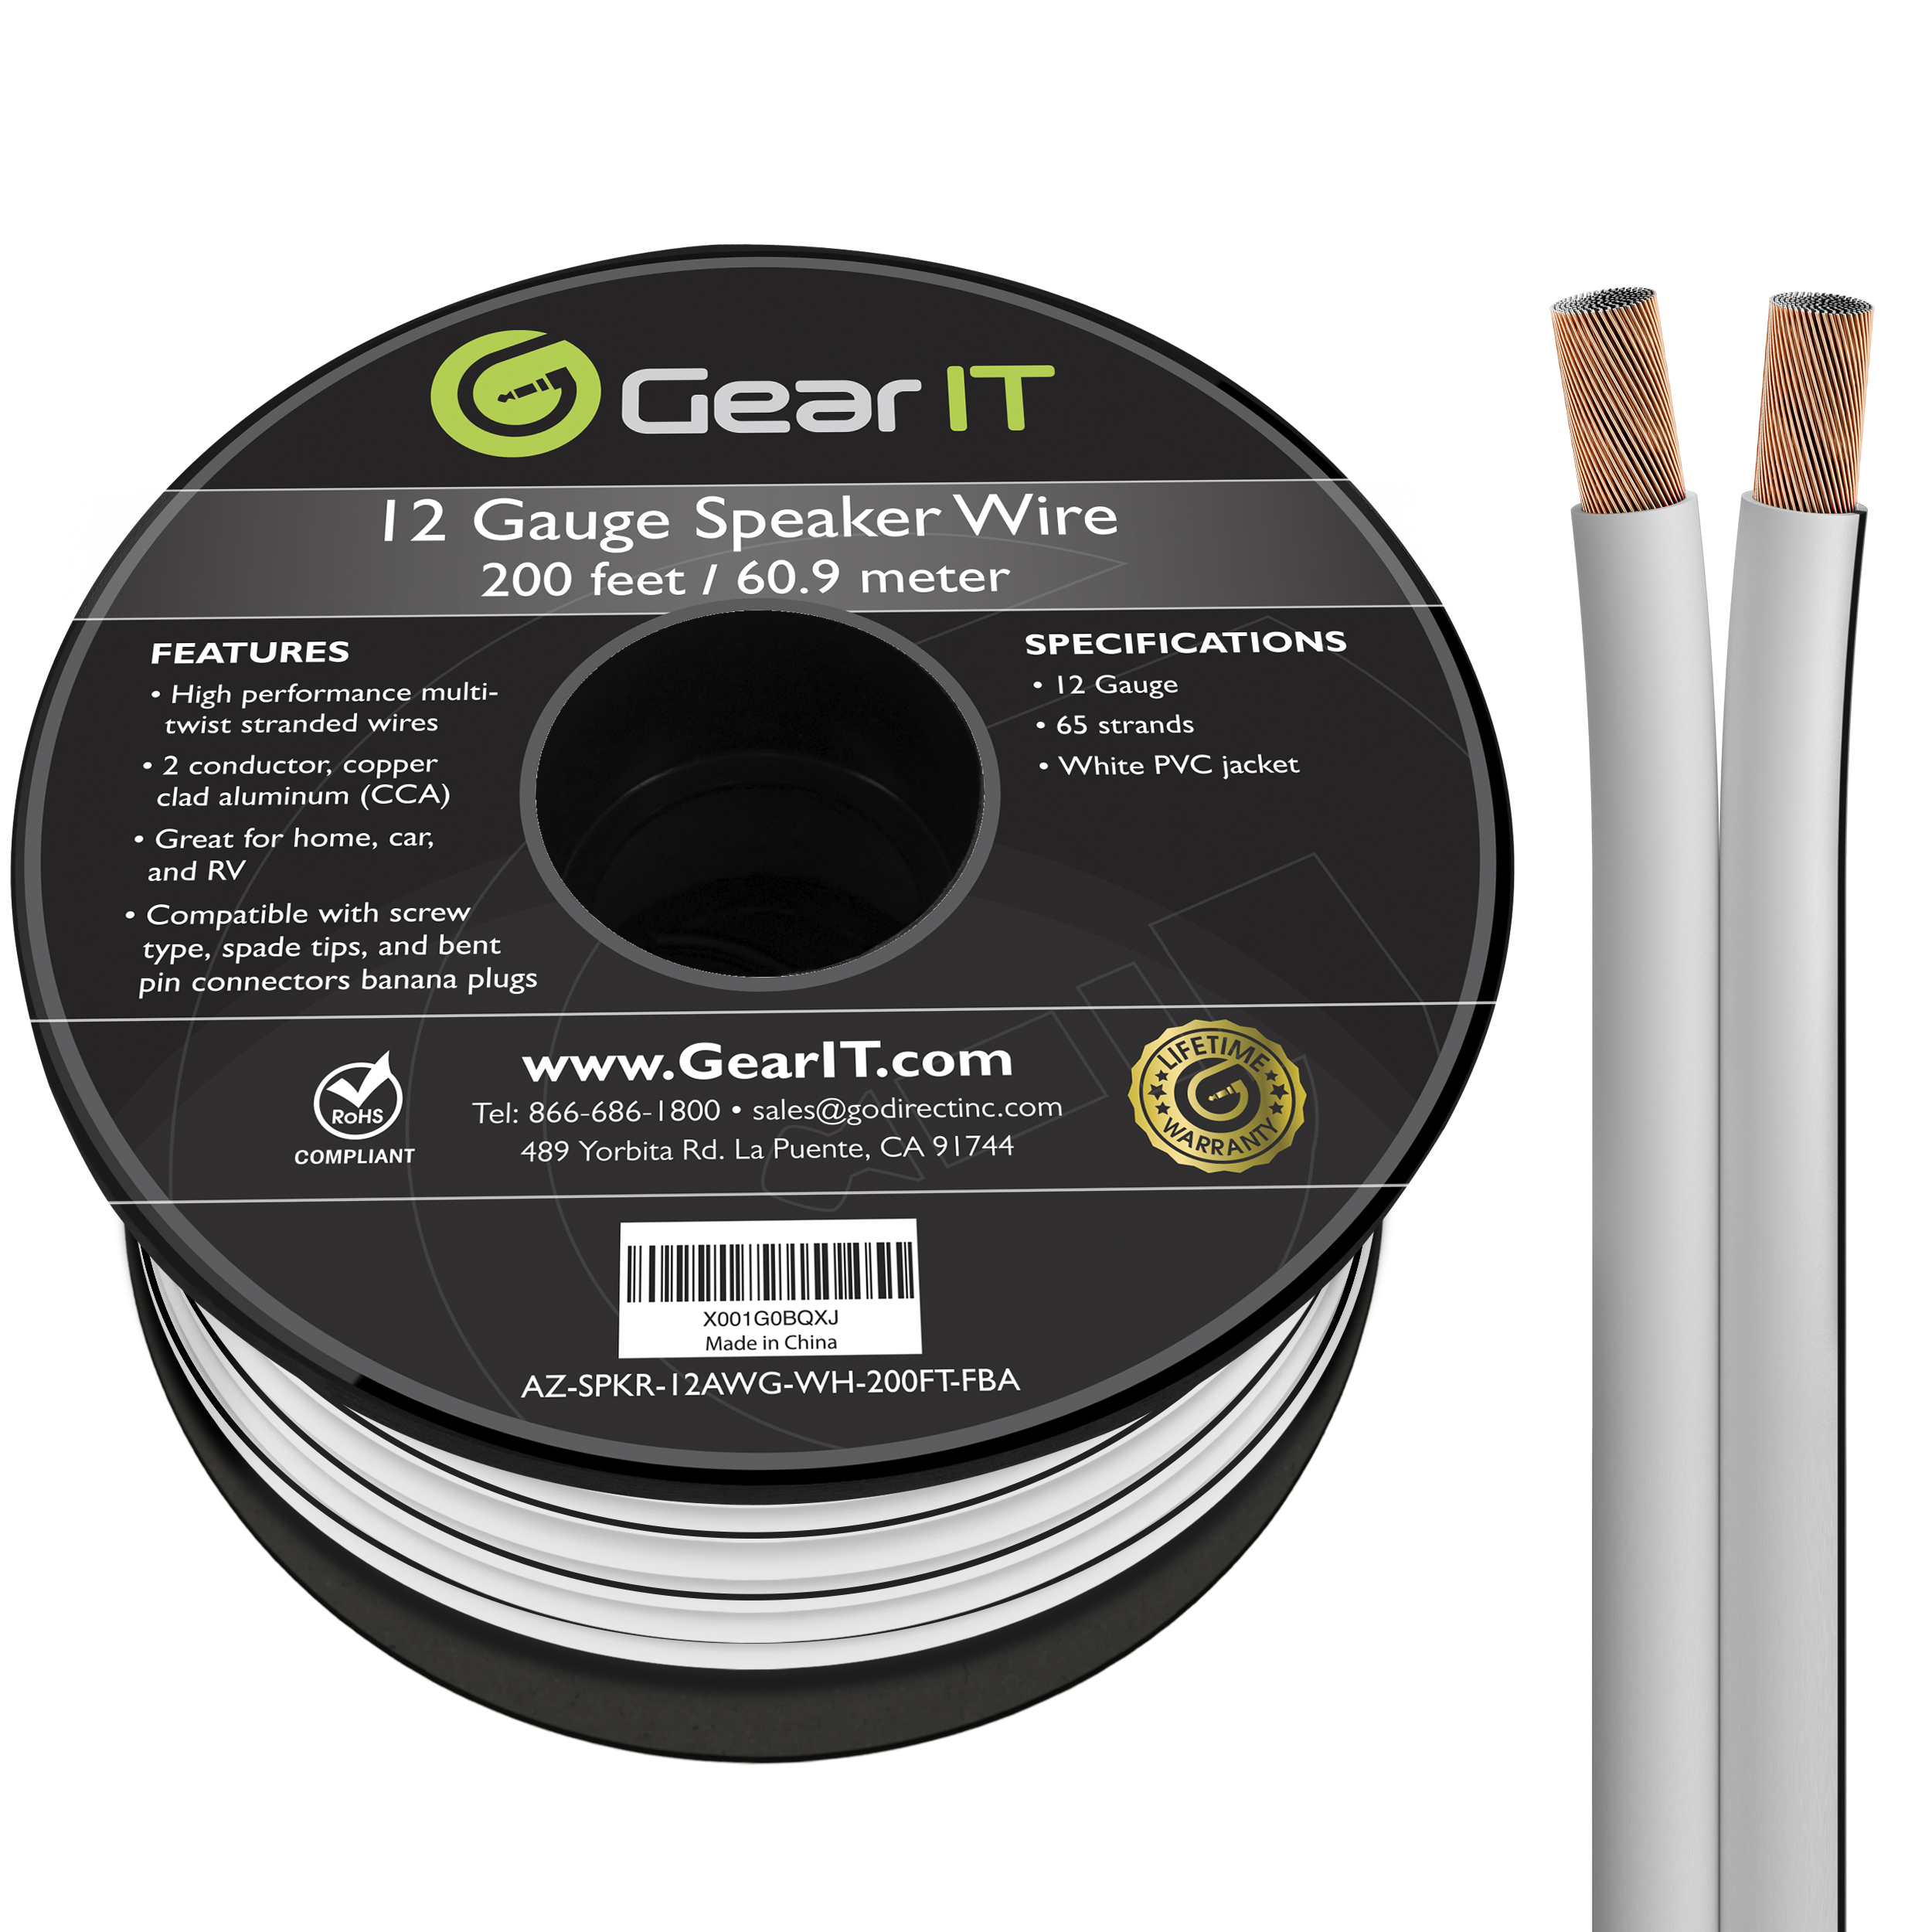 12AWG Speaker Wire, GearIT Pro Series 12 Gauge Speaker Wire Cable (200 Feet / 60 Meters) Great Use for Home Theater Speakers and Car Speakers, White - image 1 of 8